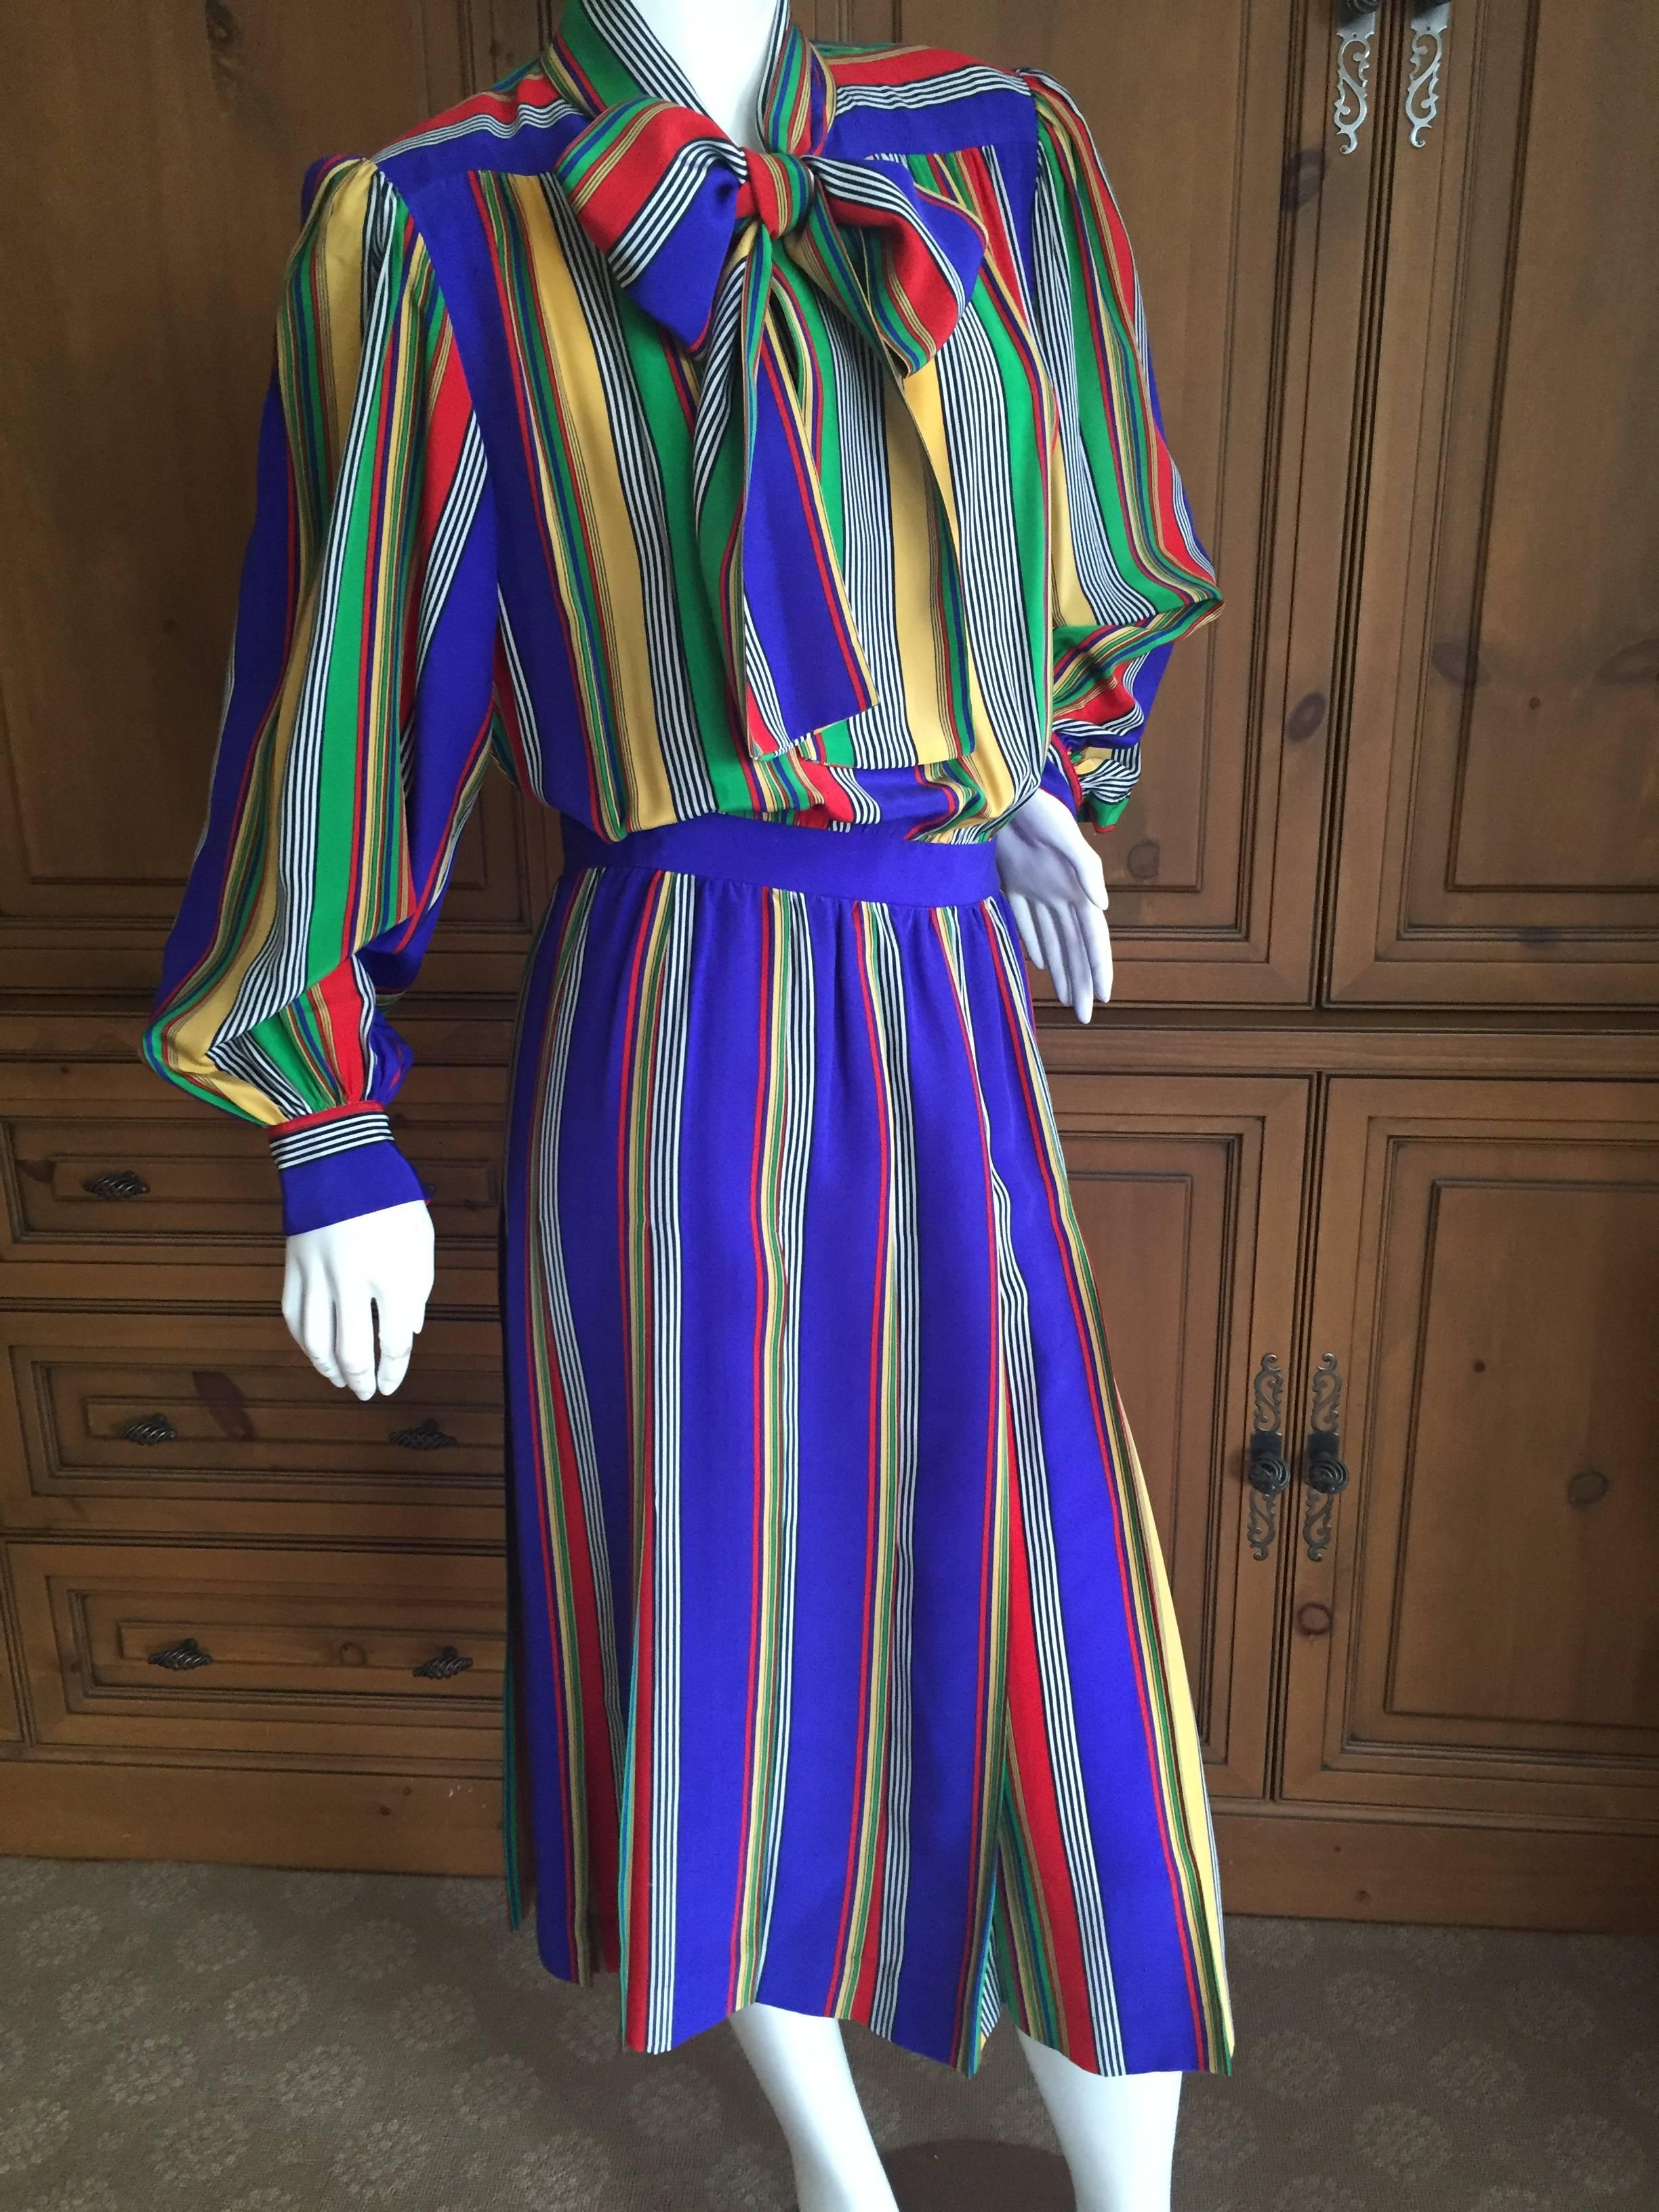 Yves Saint Laurent Rive Gauche 1970's Stripe Silk Day Dress with Bow For Sale 2